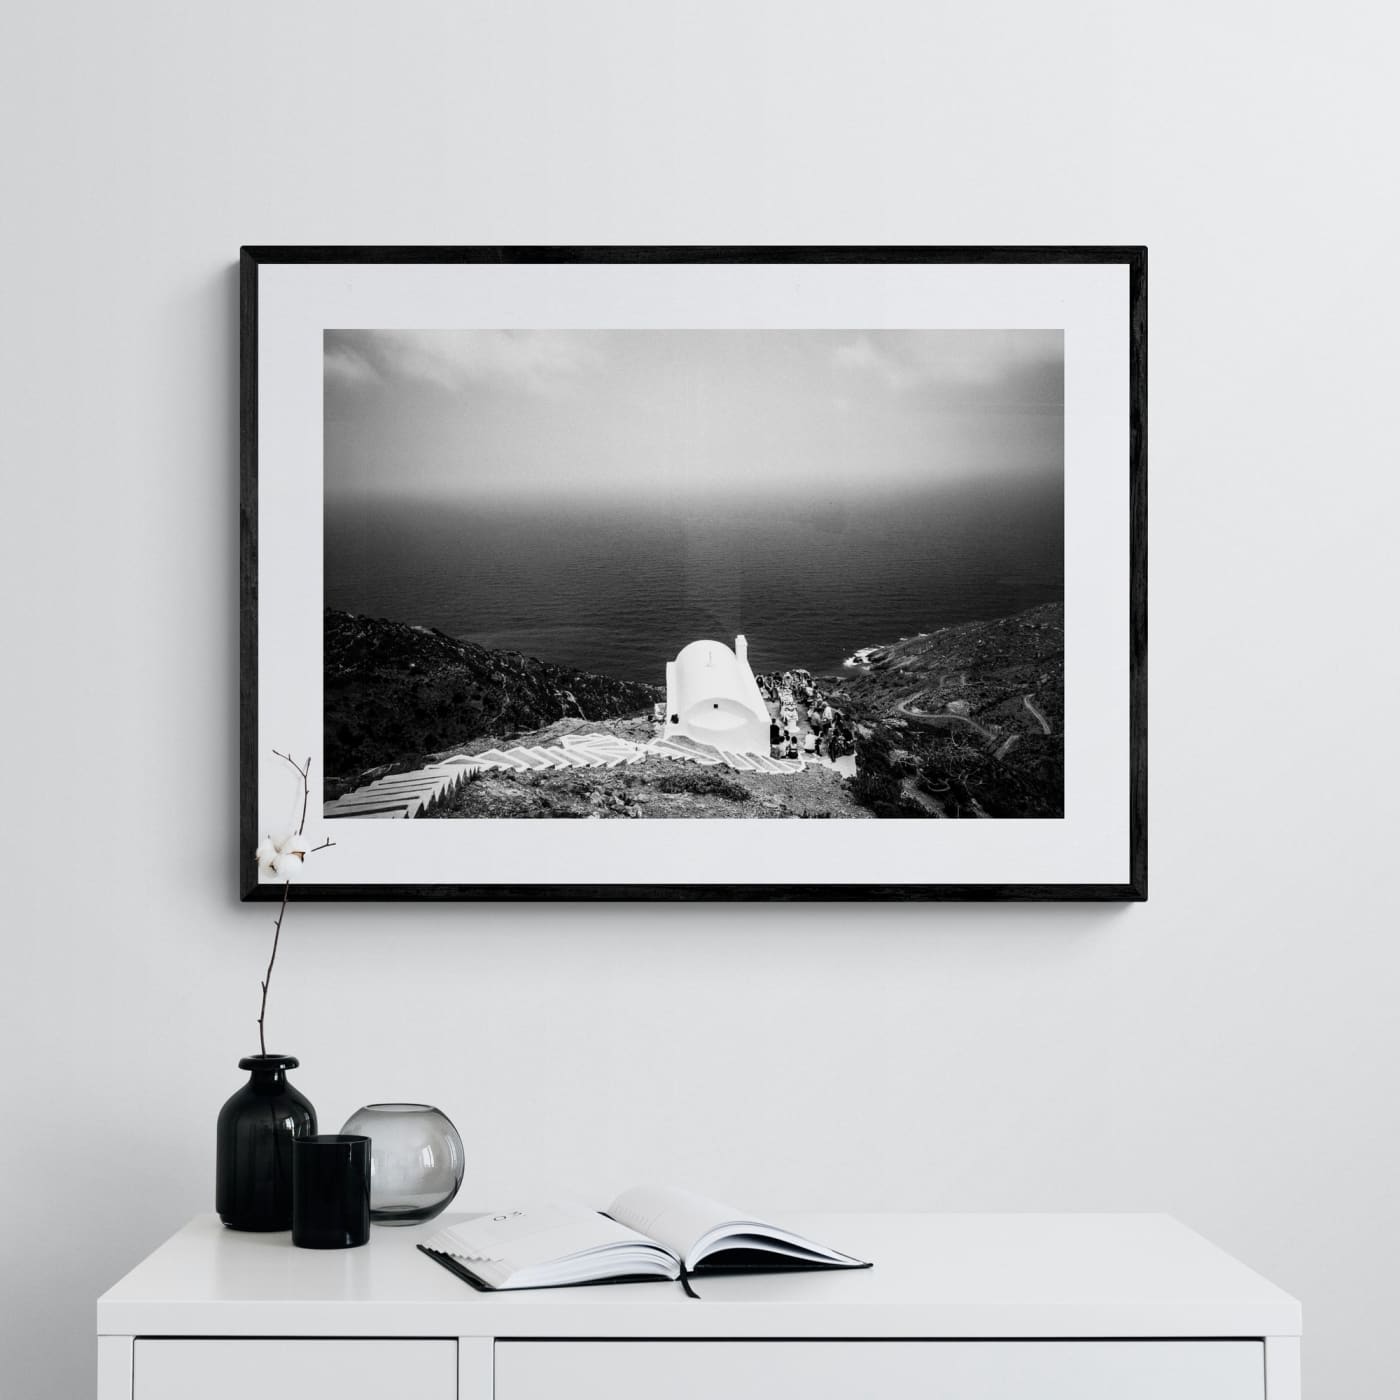 Black and White Photography Wall Art Greece | Church of Christ in Olympos Karpathos Dodecanese by George Tatakis - single framed photo